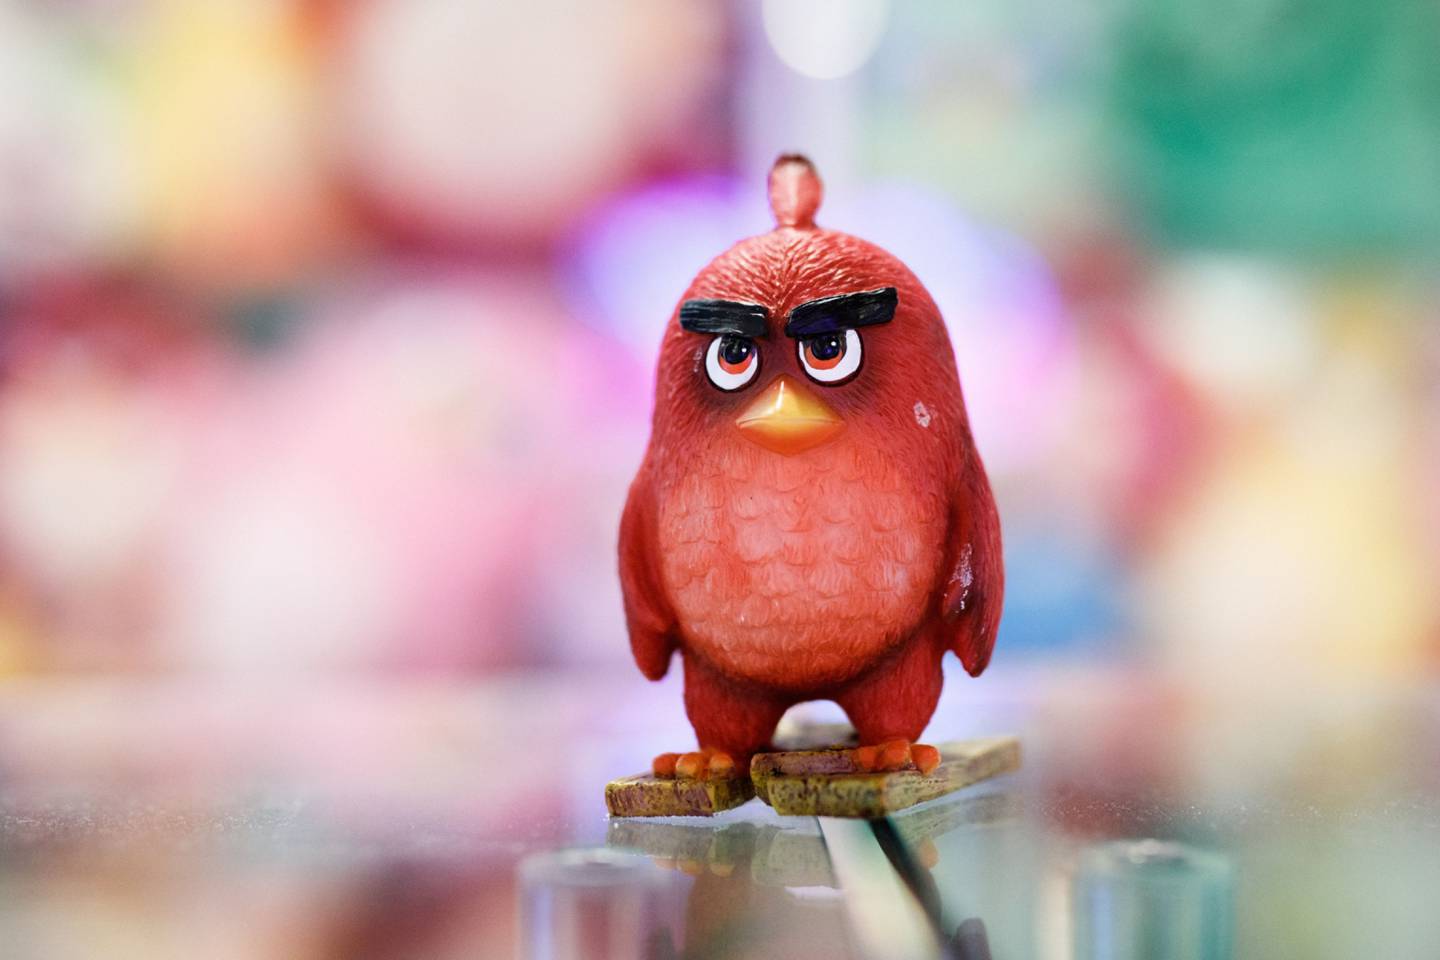 A model of Angry Birds character 'Red' sits on display inside the Rovio Entertainment Oy headquarters in Espoo, Finland.